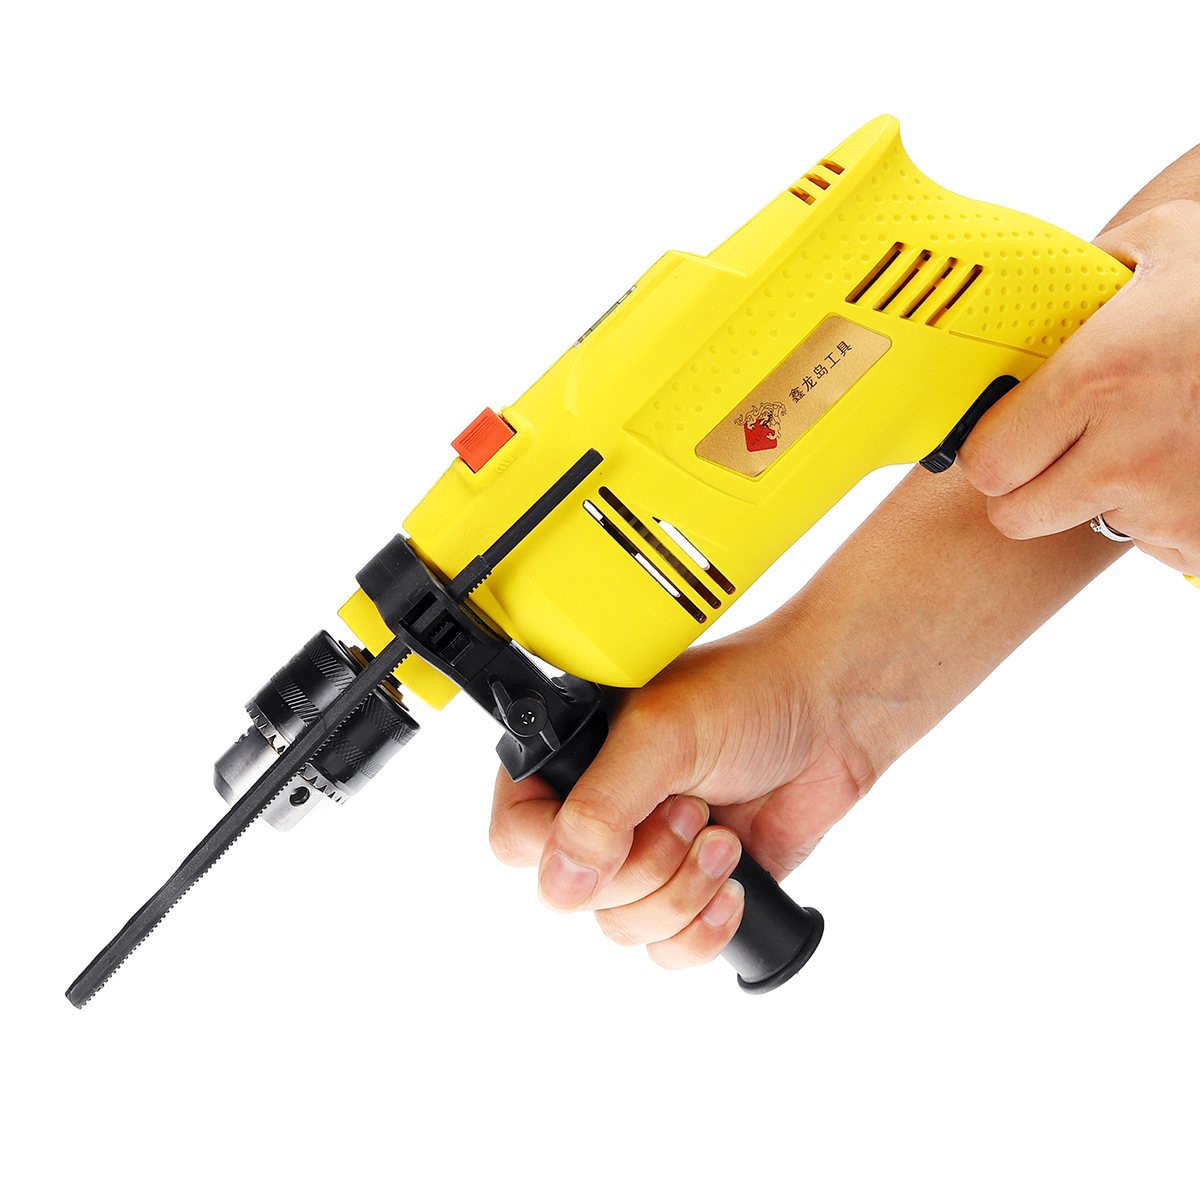 1980W-3800rpm-Electric-Impact-Drill-0-3800rmin-Electric-Drill-Five-Axes-Linkage-Power-Drills-Powerfu-1468497-5